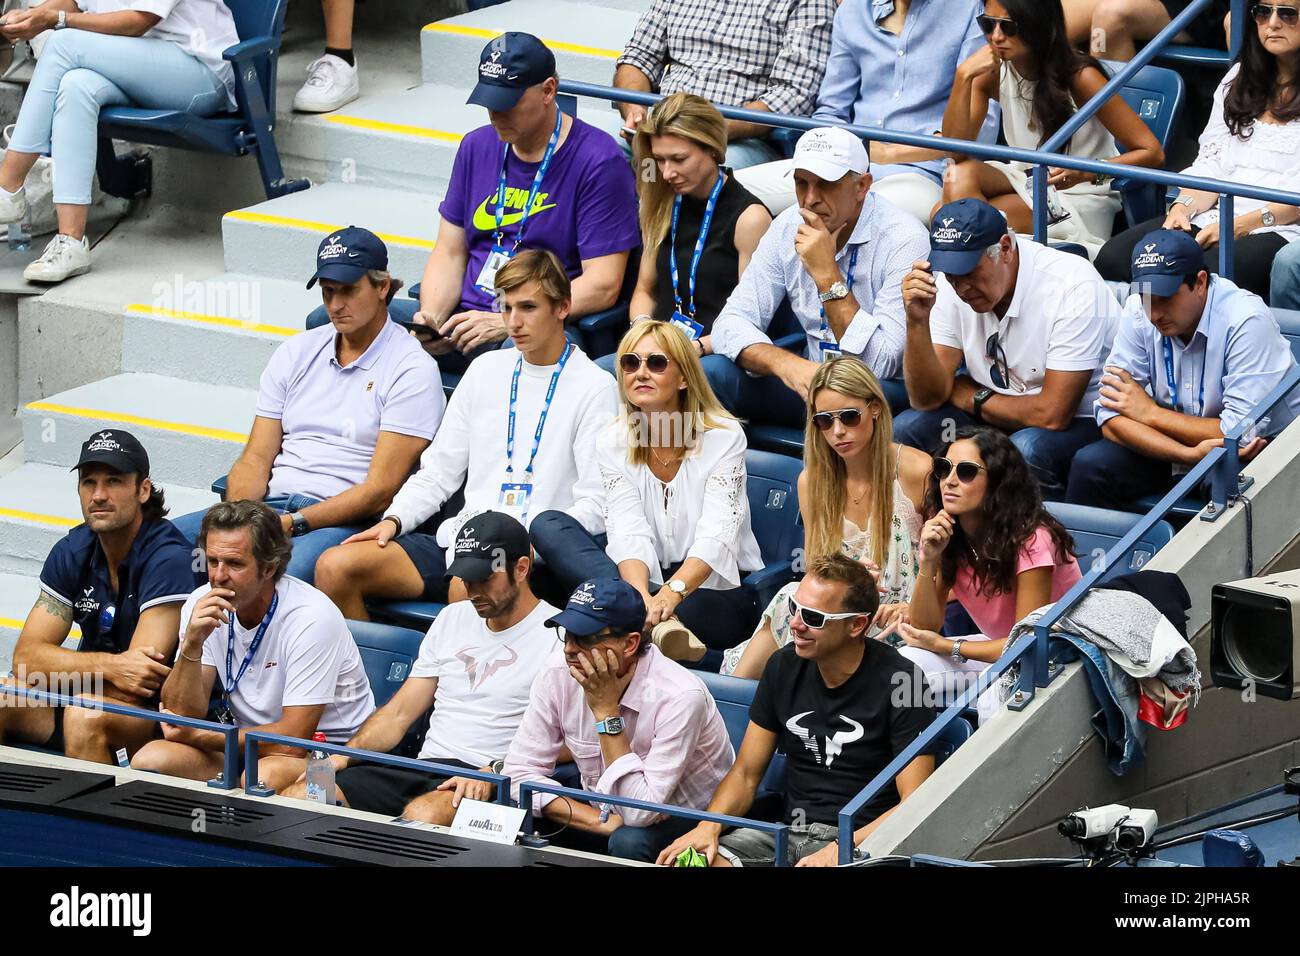 New York, USA. 08th Sep, 2019. Rafael Nadal's family - Sebastián Nadal, María Isabel Nadal, Ana María Parera, Xisca Perelló - watches the final between Rafael Nadal of Spain and Daniil Medvedev of Russia at Arthur Ashe Stadium at the USTA Billie Jean King National Tennis Center on September 08, 2019 in New York City. Credit: Independent Photo Agency/Alamy Live News Stock Photo